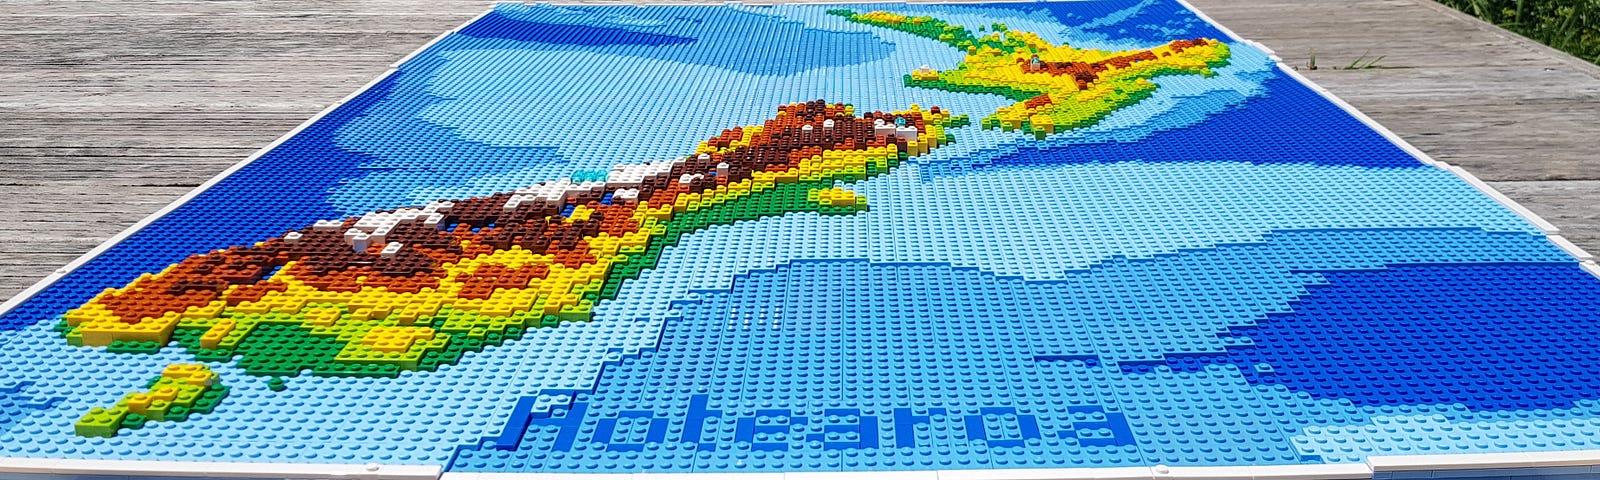 25x16 US Topographic Map made with LEGO® bricks